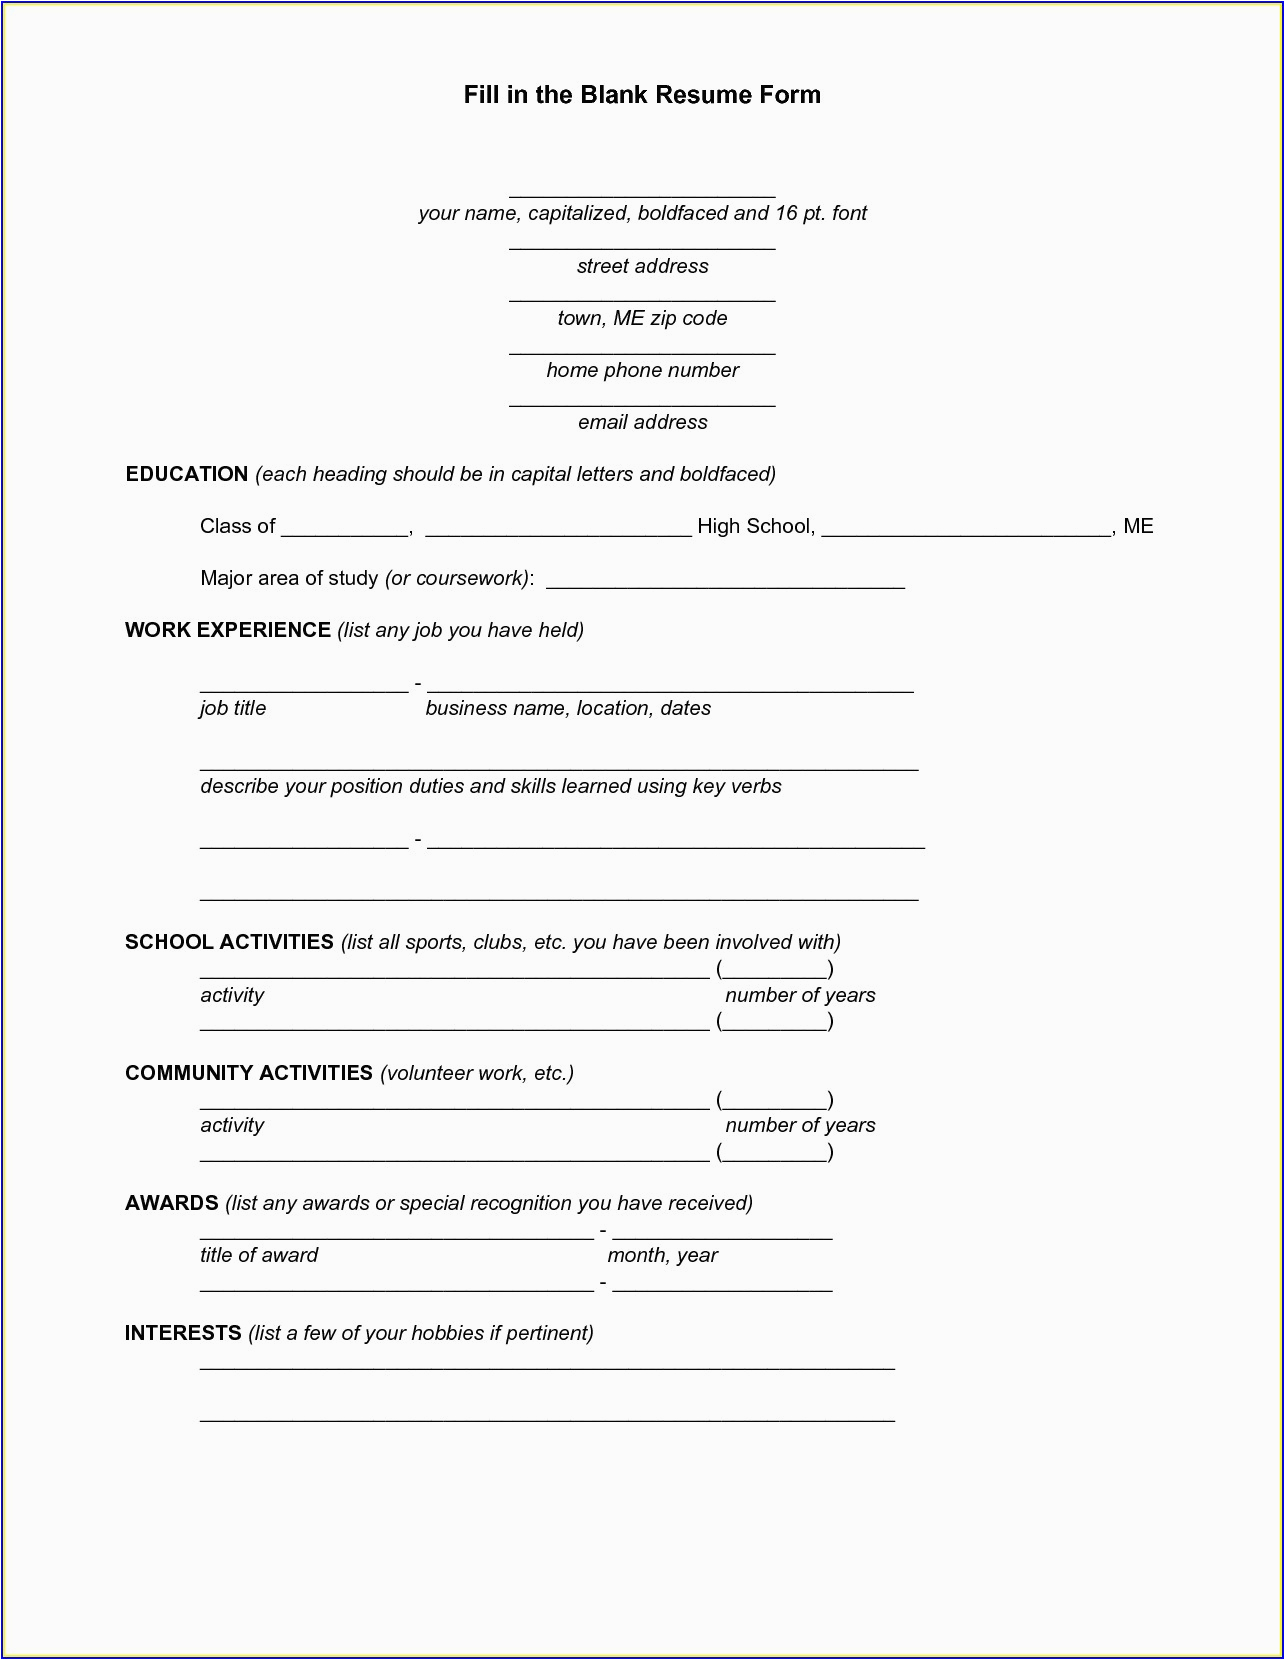 Resume Fill In the Blank Template Fill In the Blank Resume Templates for Microsoft Word